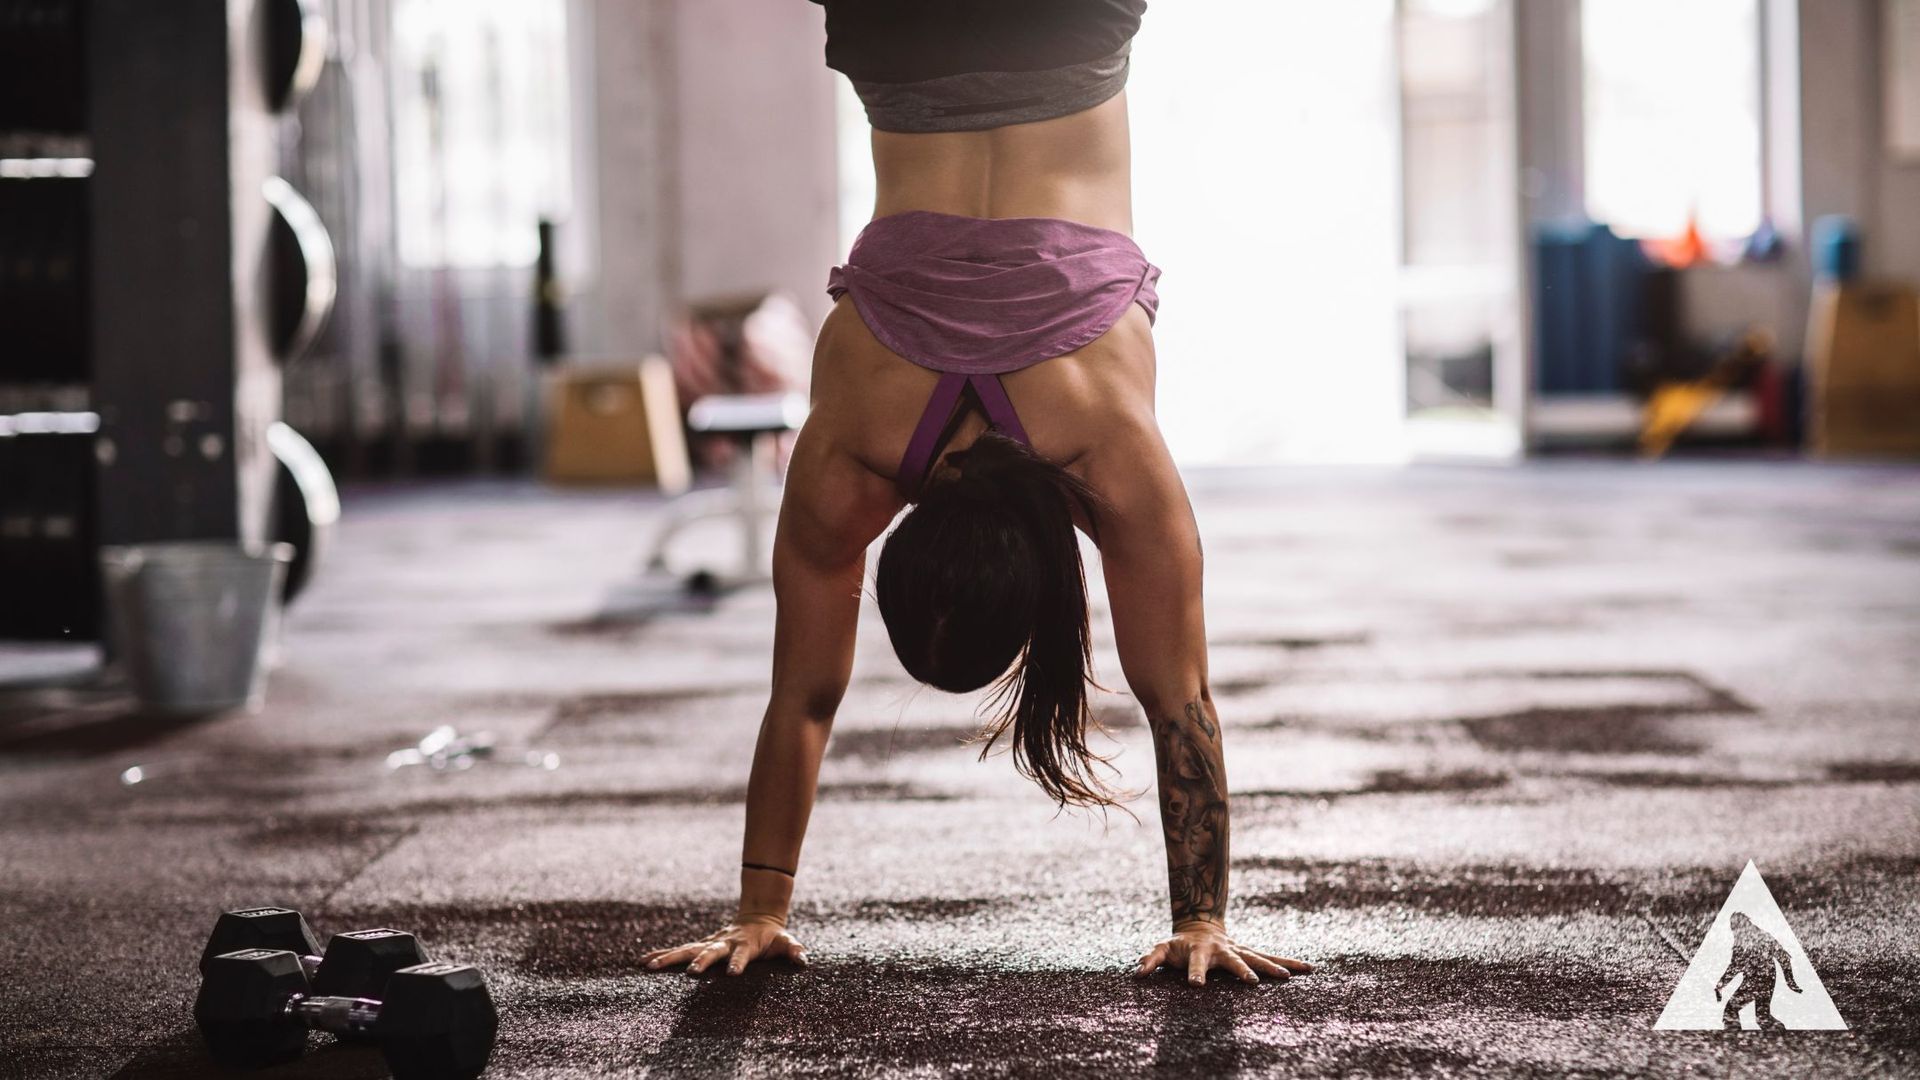 6 Reasons to Work on a Handstand